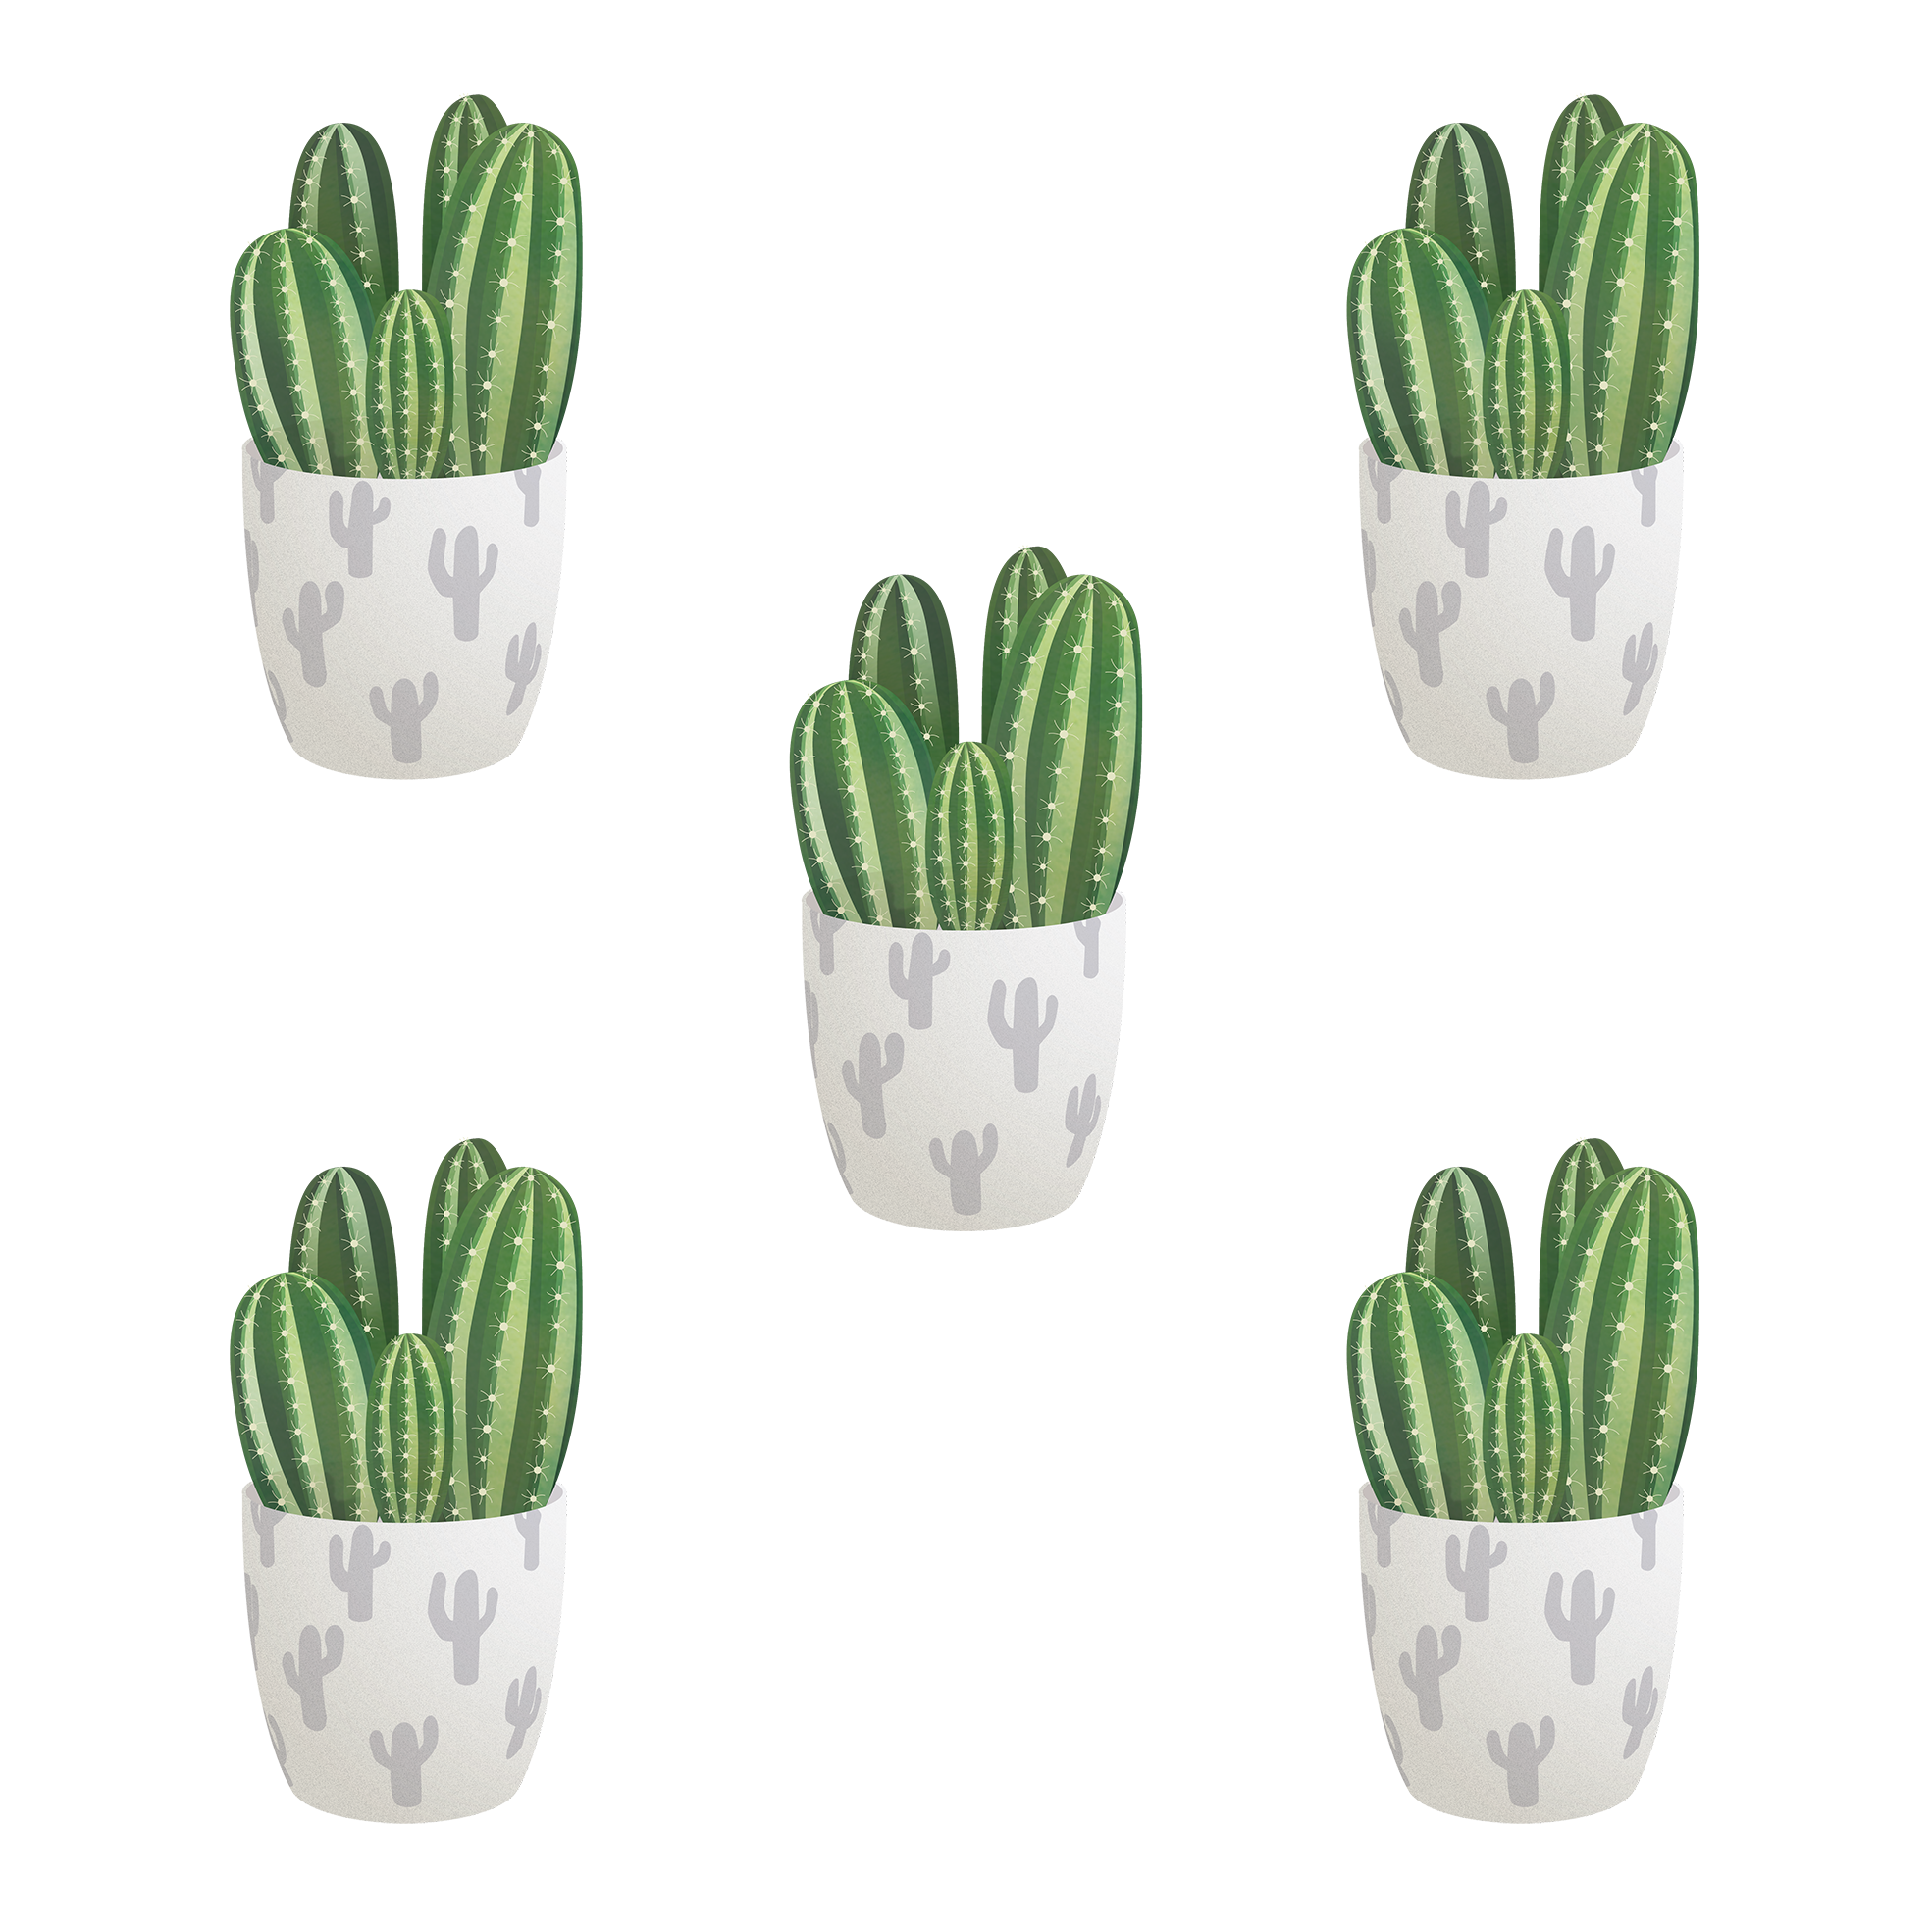 Cactus plant vector PNG Image